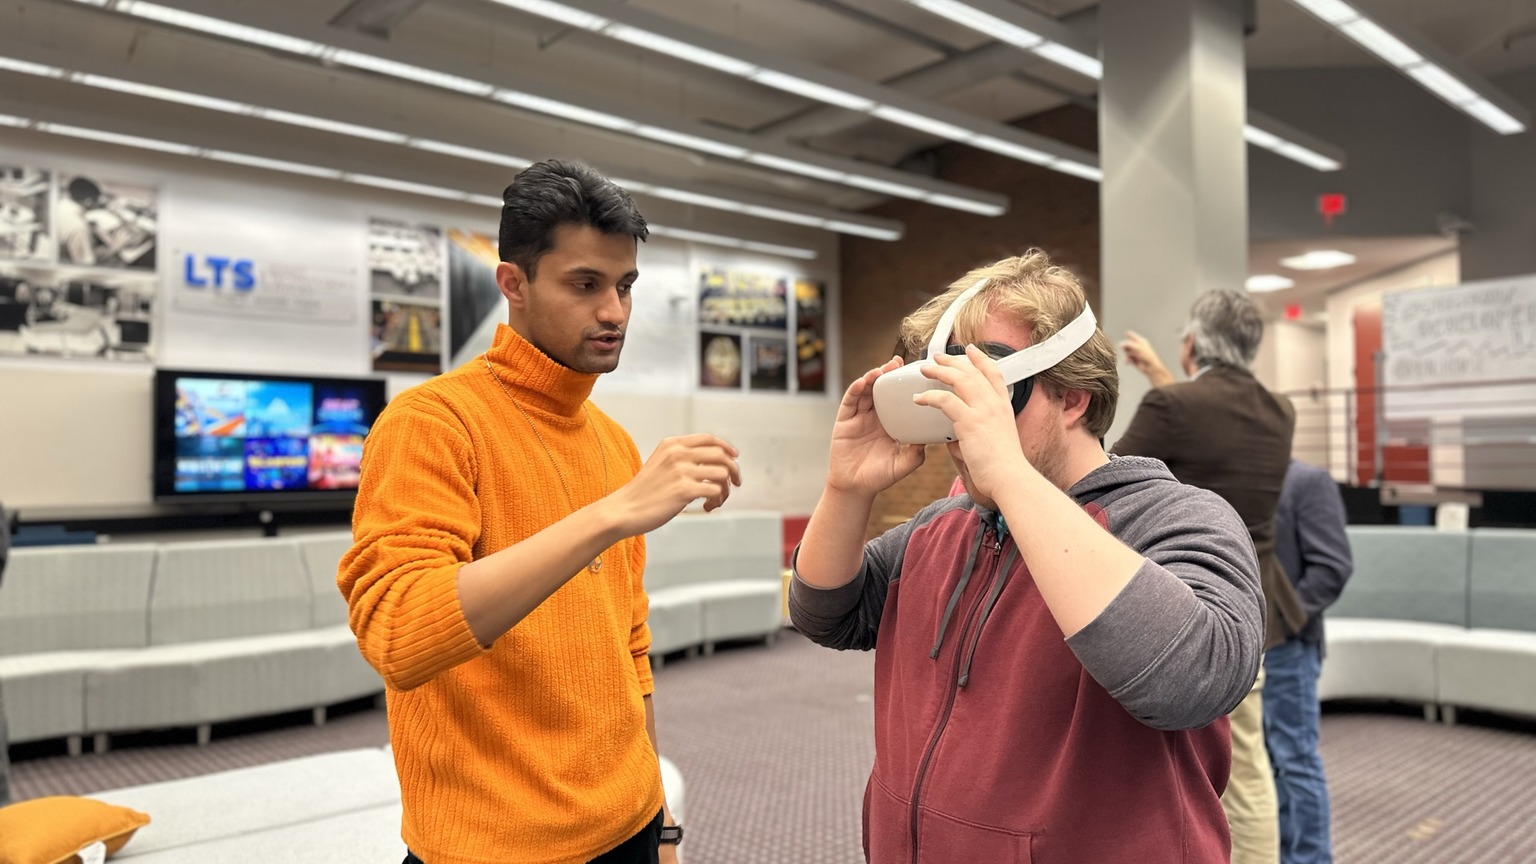 Graduate student assists another student with VR equipment at Student Developer Lab Open House